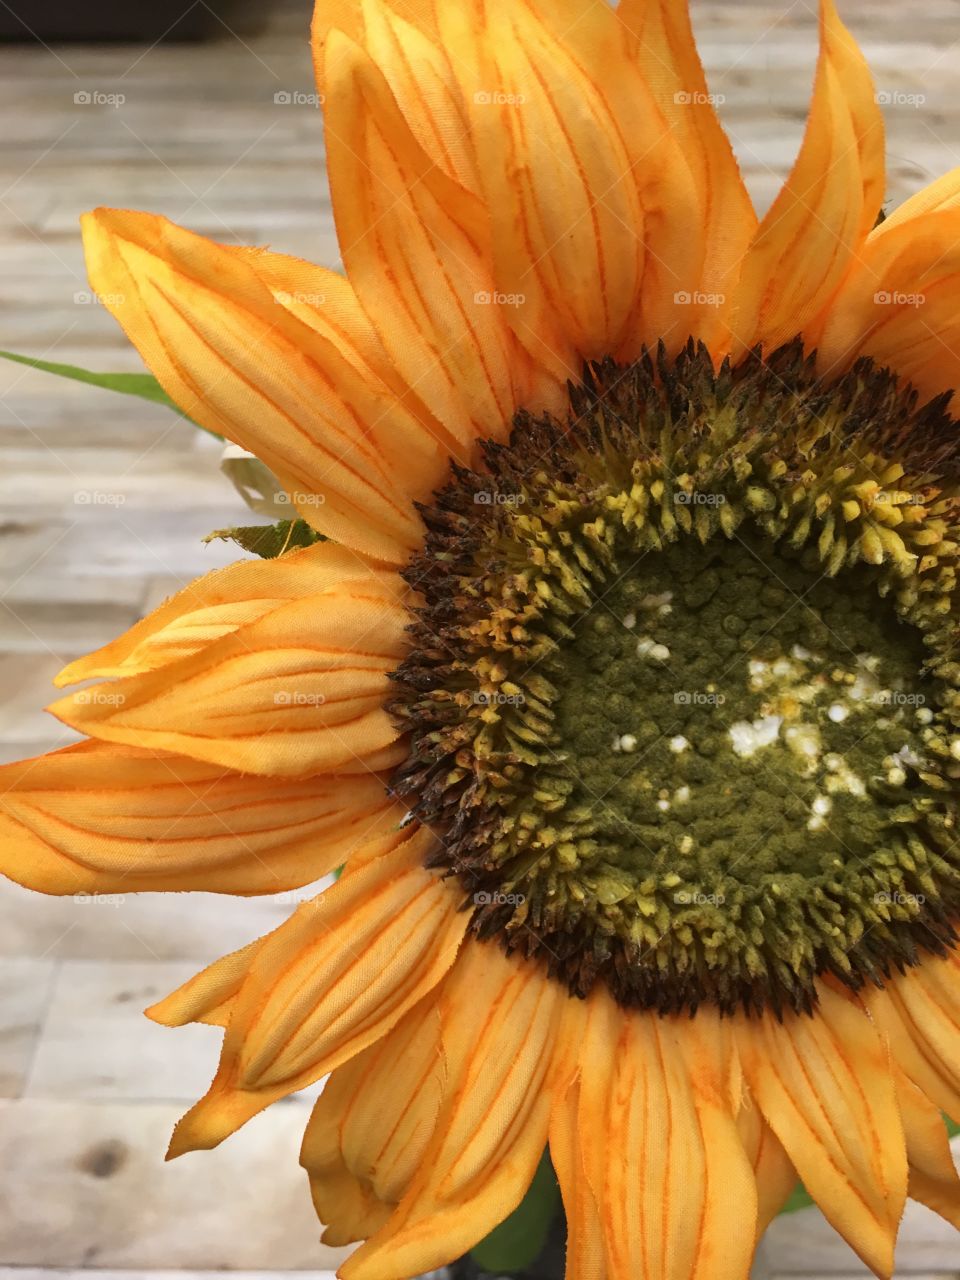 This gorgeous sun flower represents a yellowish ton of yellow 